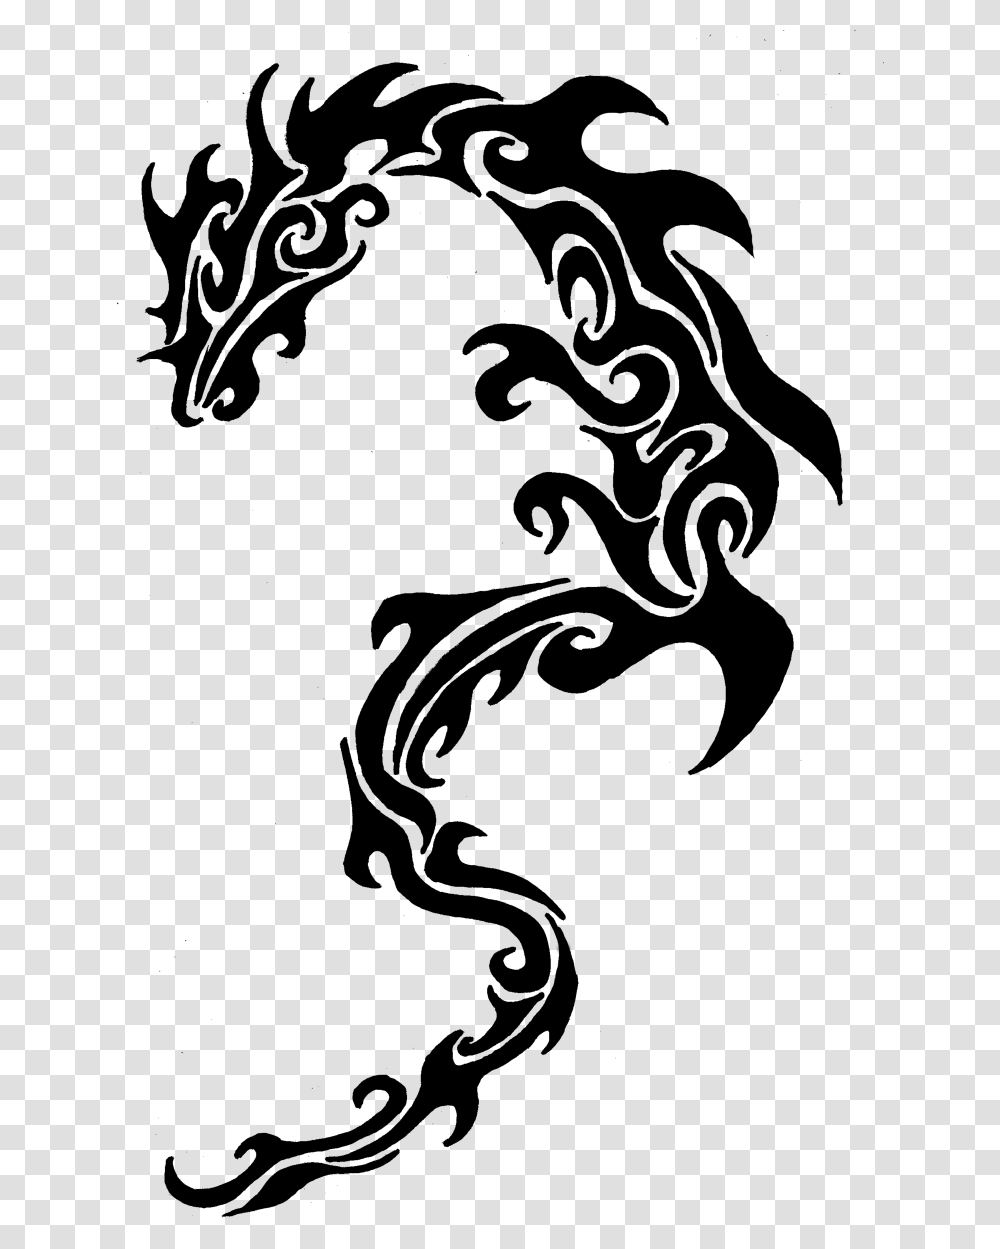 Tribal Dragon Design Black And White Tribal, Nature, Outdoors, Night, Outer Space Transparent Png